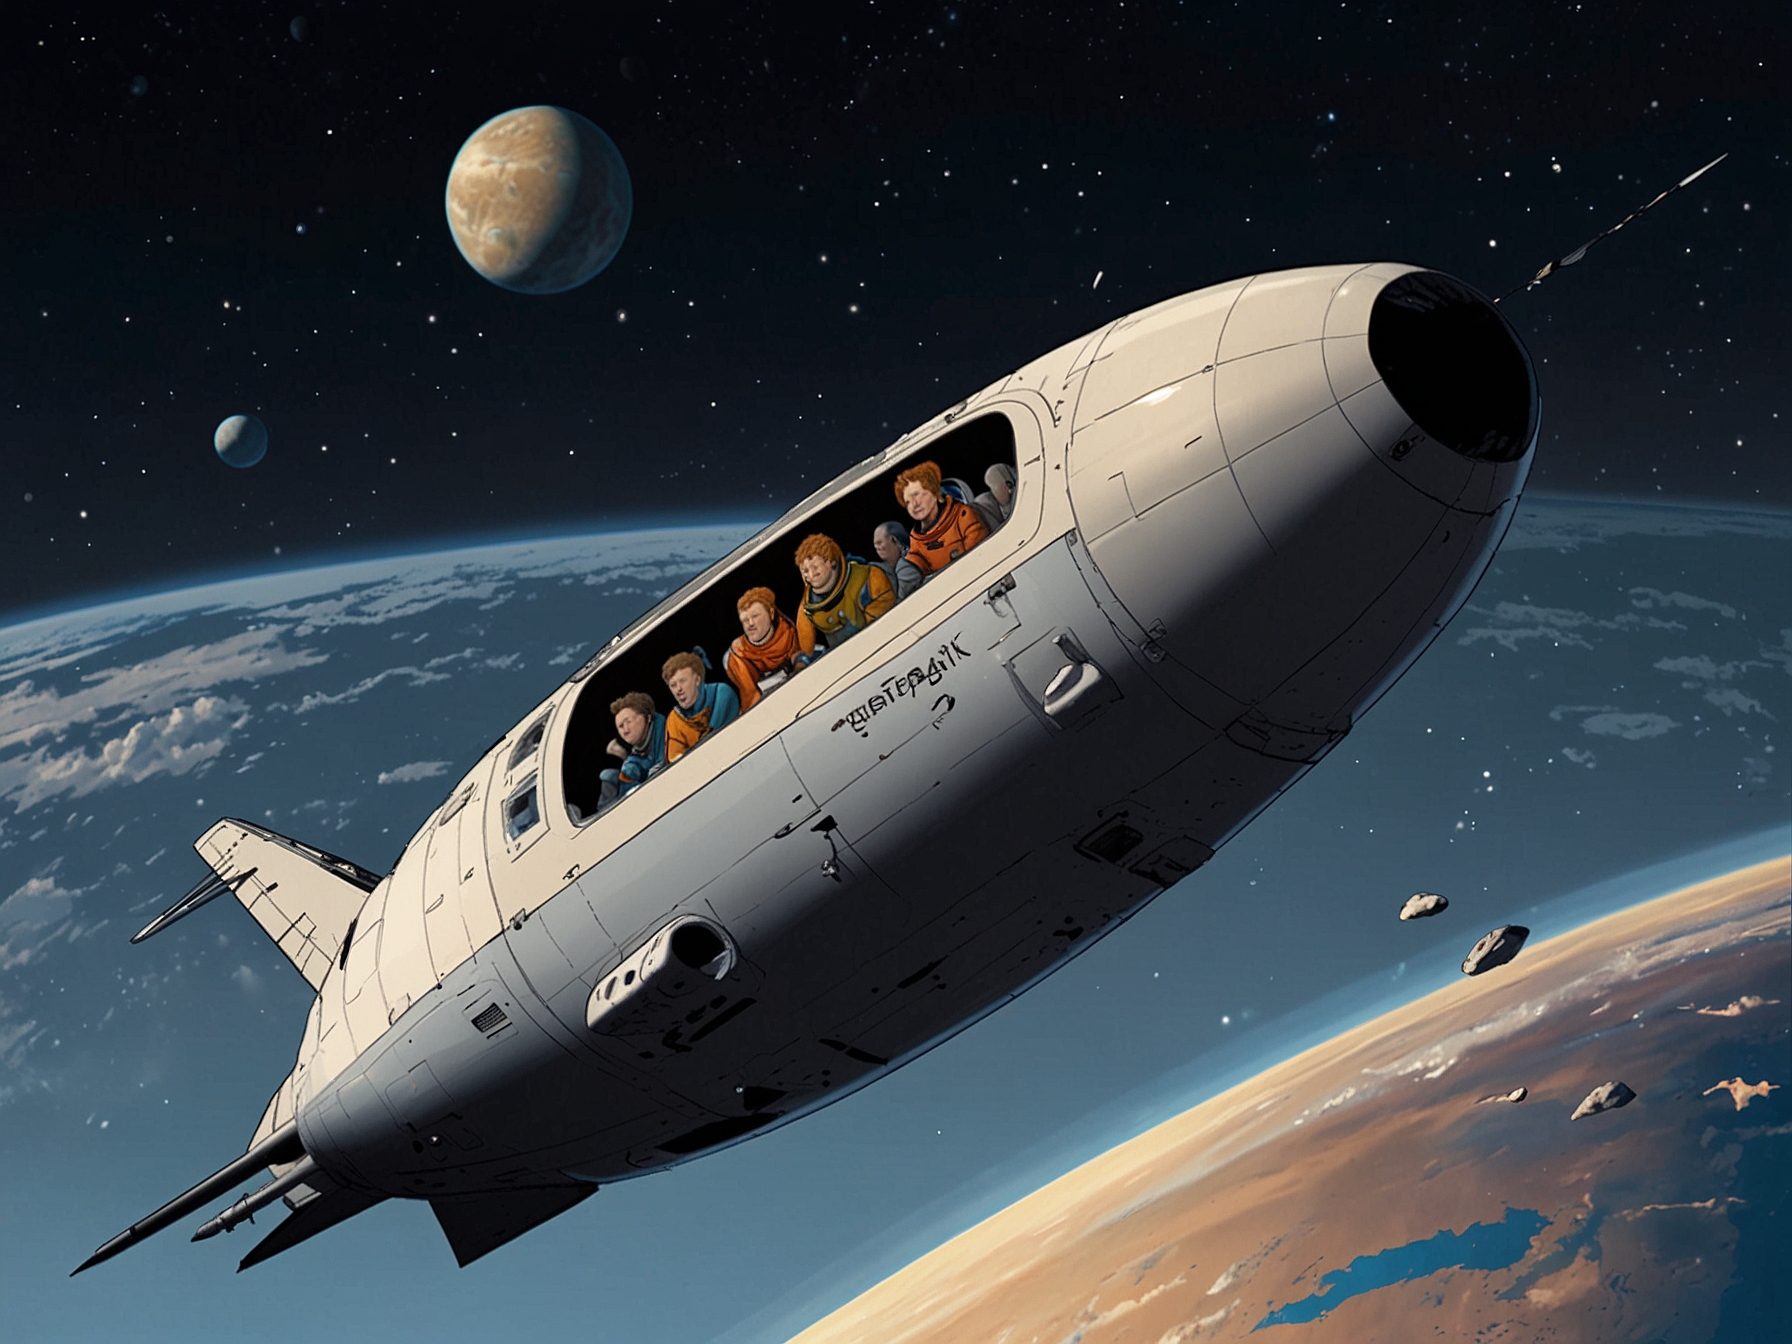 A conceptual image of passengers experiencing weightlessness aboard EOS-X SPACE's suborbital flight, with the curvature of the Earth visible through the spacecraft's windows.